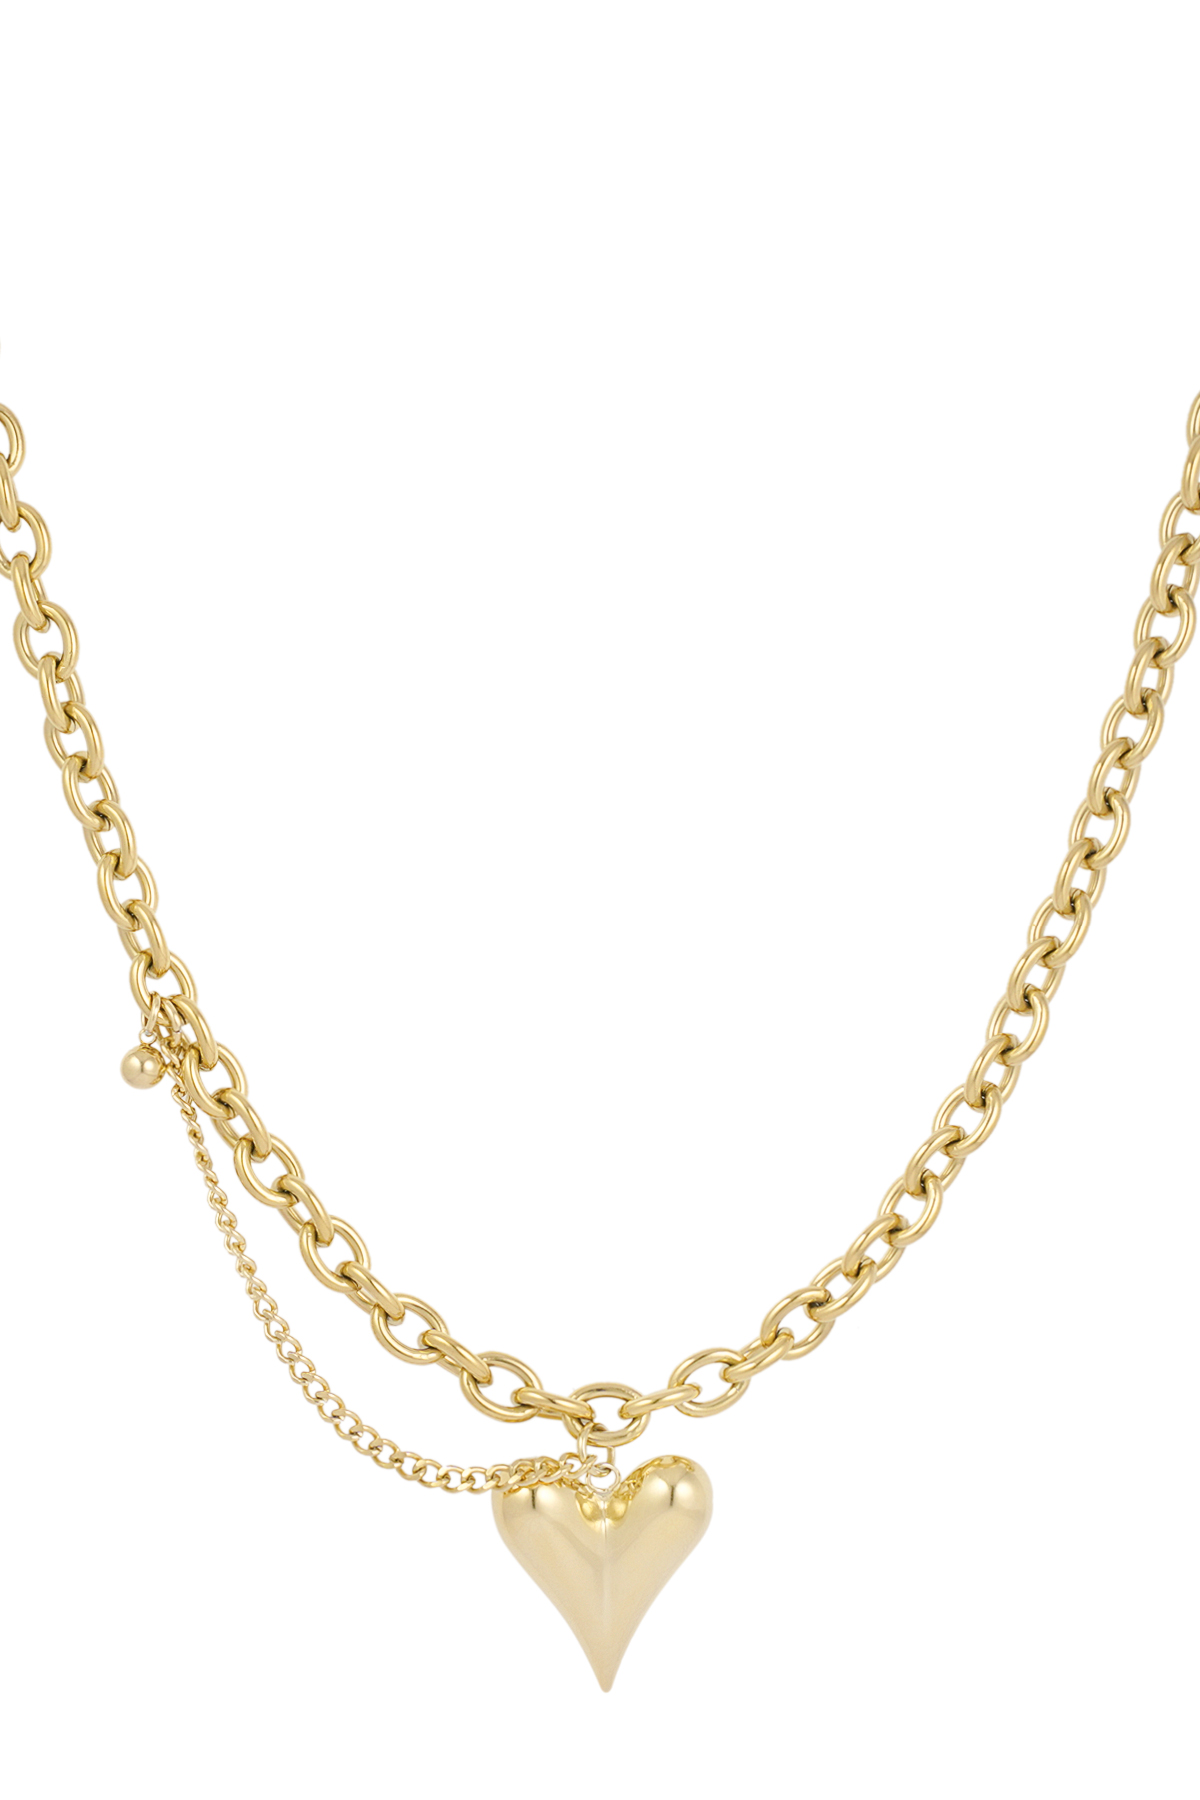 Necklace love life - gold